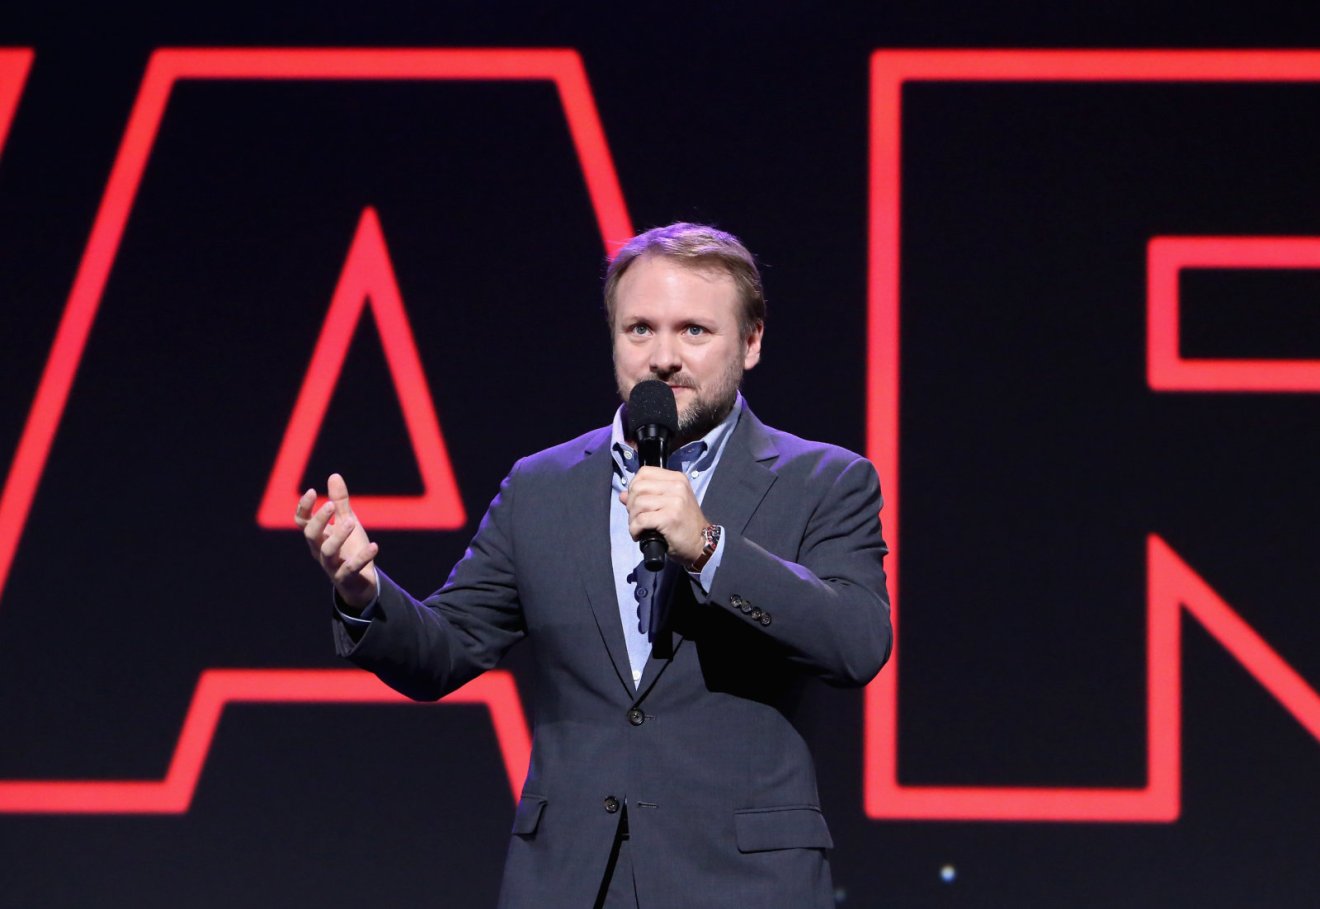 ANAHEIM, CA - JULY 15:  Director Rian Johnson of STAR WARS: THE LAST JEDI took part today in the Walt Disney Studios live action presentation at Disney's D23 EXPO 2017 in Anaheim, Calif.STAR WARS: THE LAST JEDI will be released in U.S. theaters on December 15, 2017.  (Photo by Jesse Grant/Getty Images for Disney)